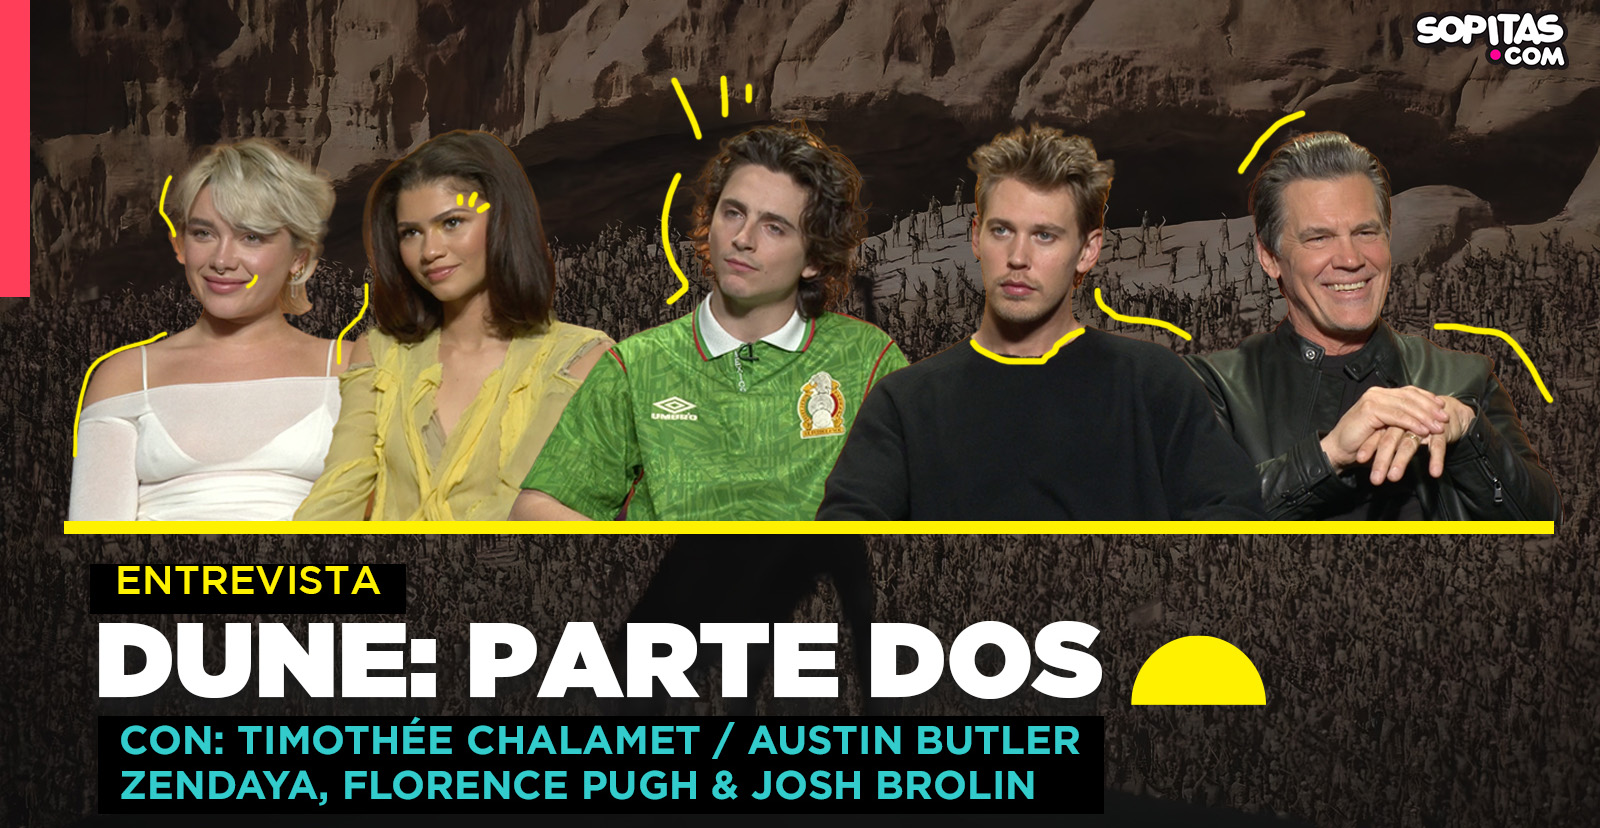 Interview with Timothée Chalamet, Zendaya and the cast of “Dune: Part Two”

